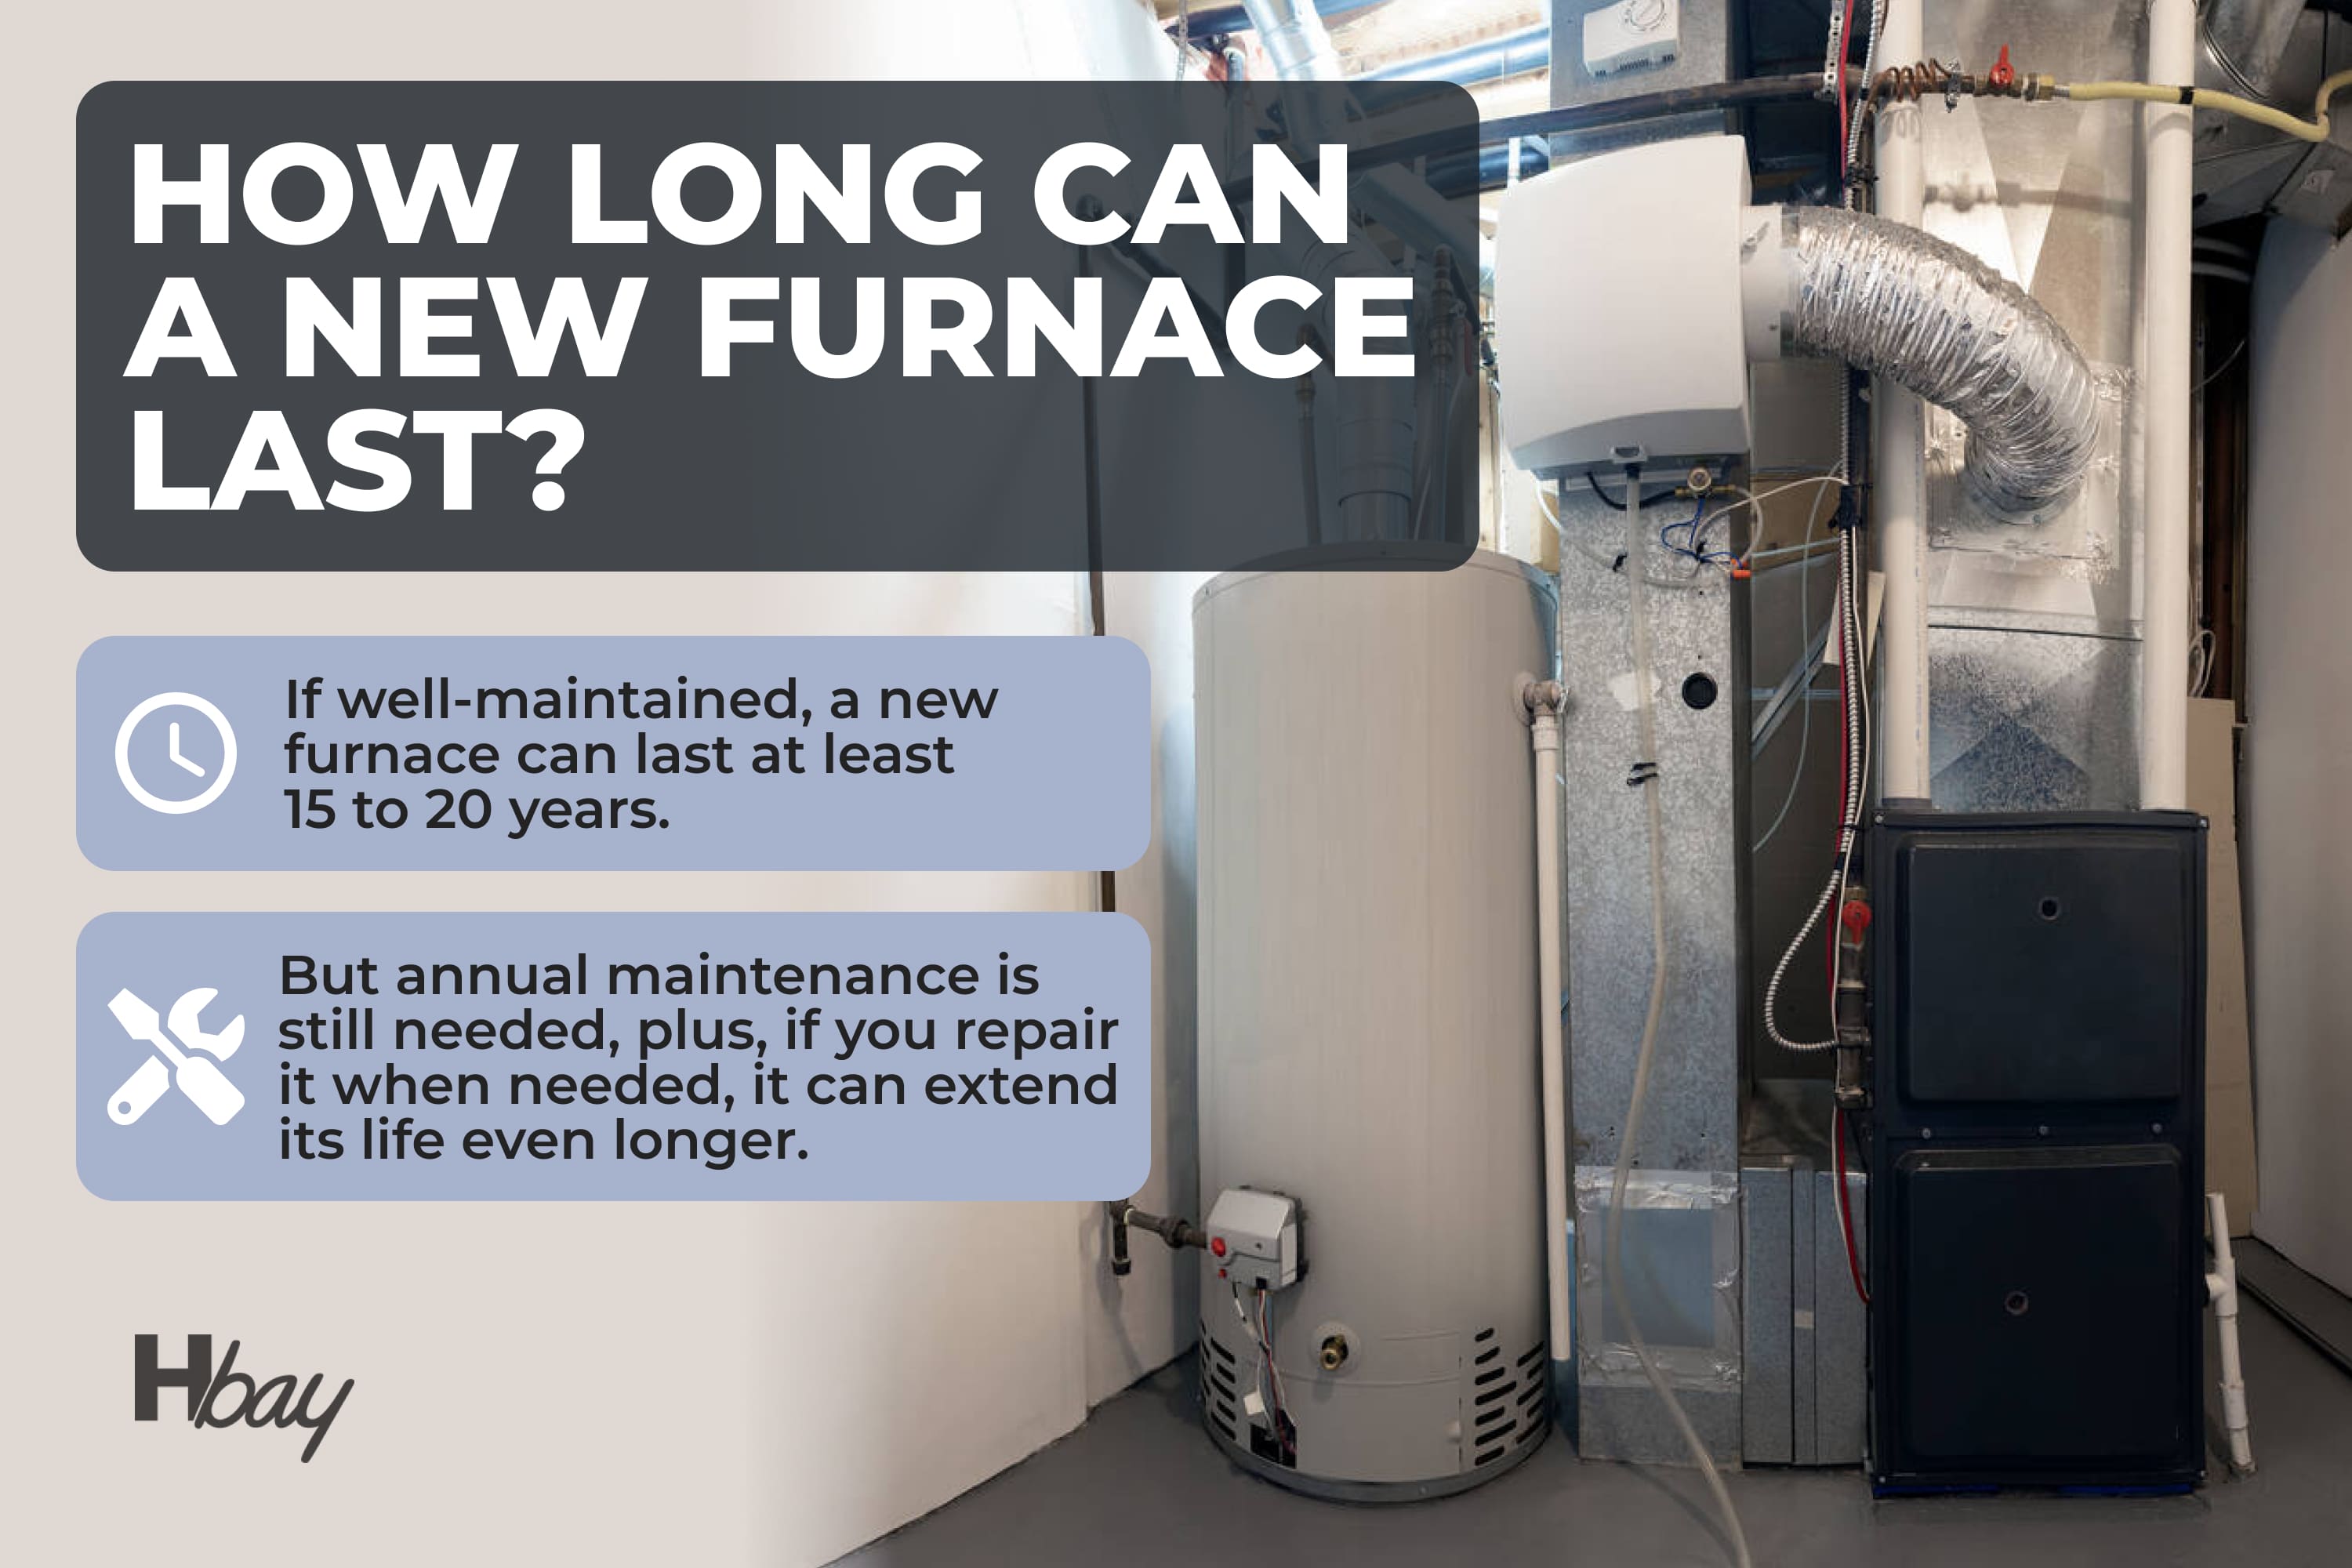 How long can a new furnace last